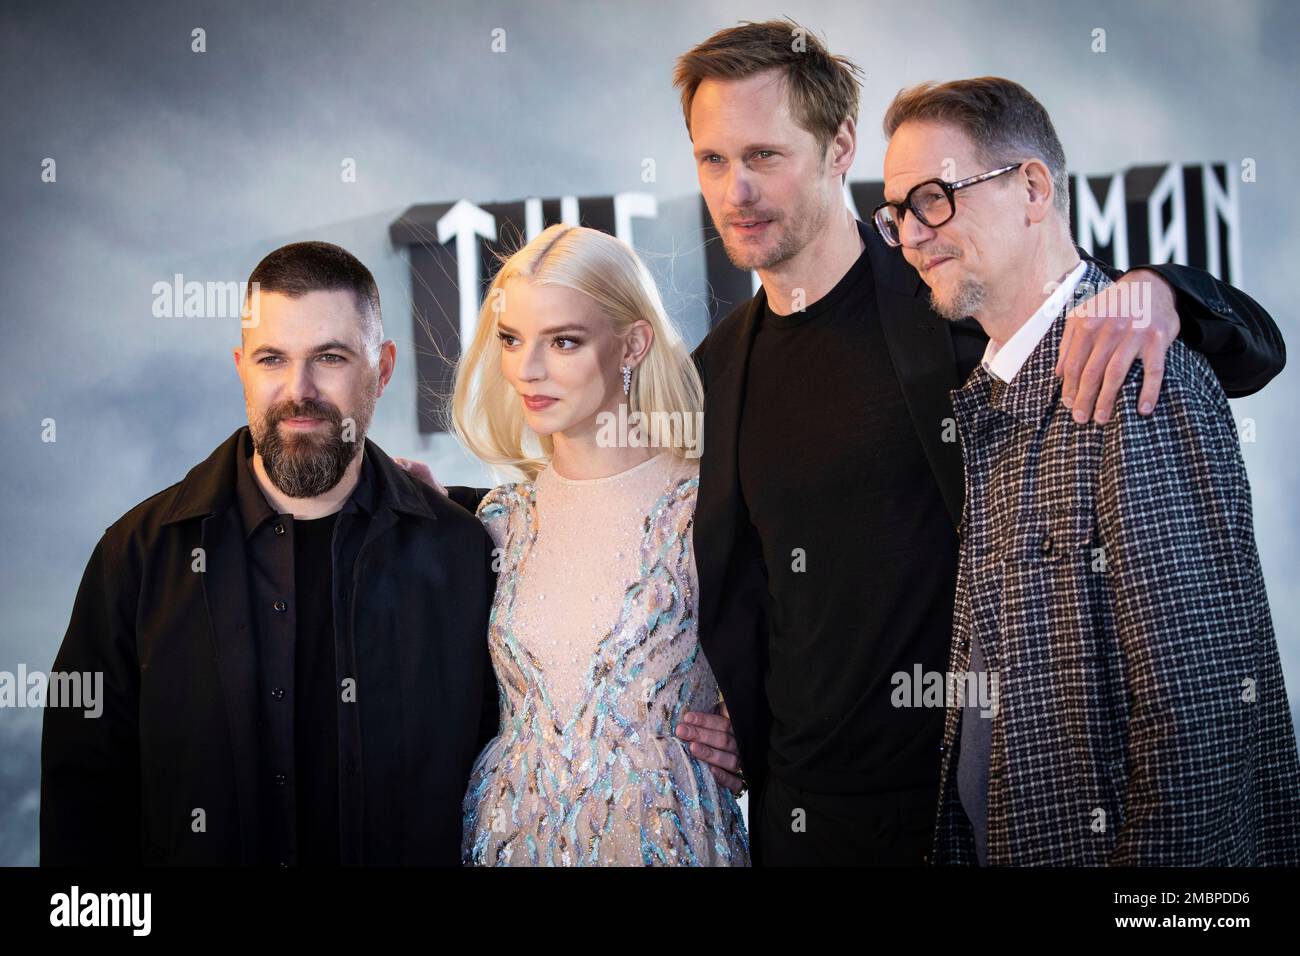 Robert Eggers, from left, Anya Taylor-Joy, Alexander Skarsgard and Sjon pose for photographers upon arrival at the premiere of the film The Northman in London Tuesday, April 5, 2022